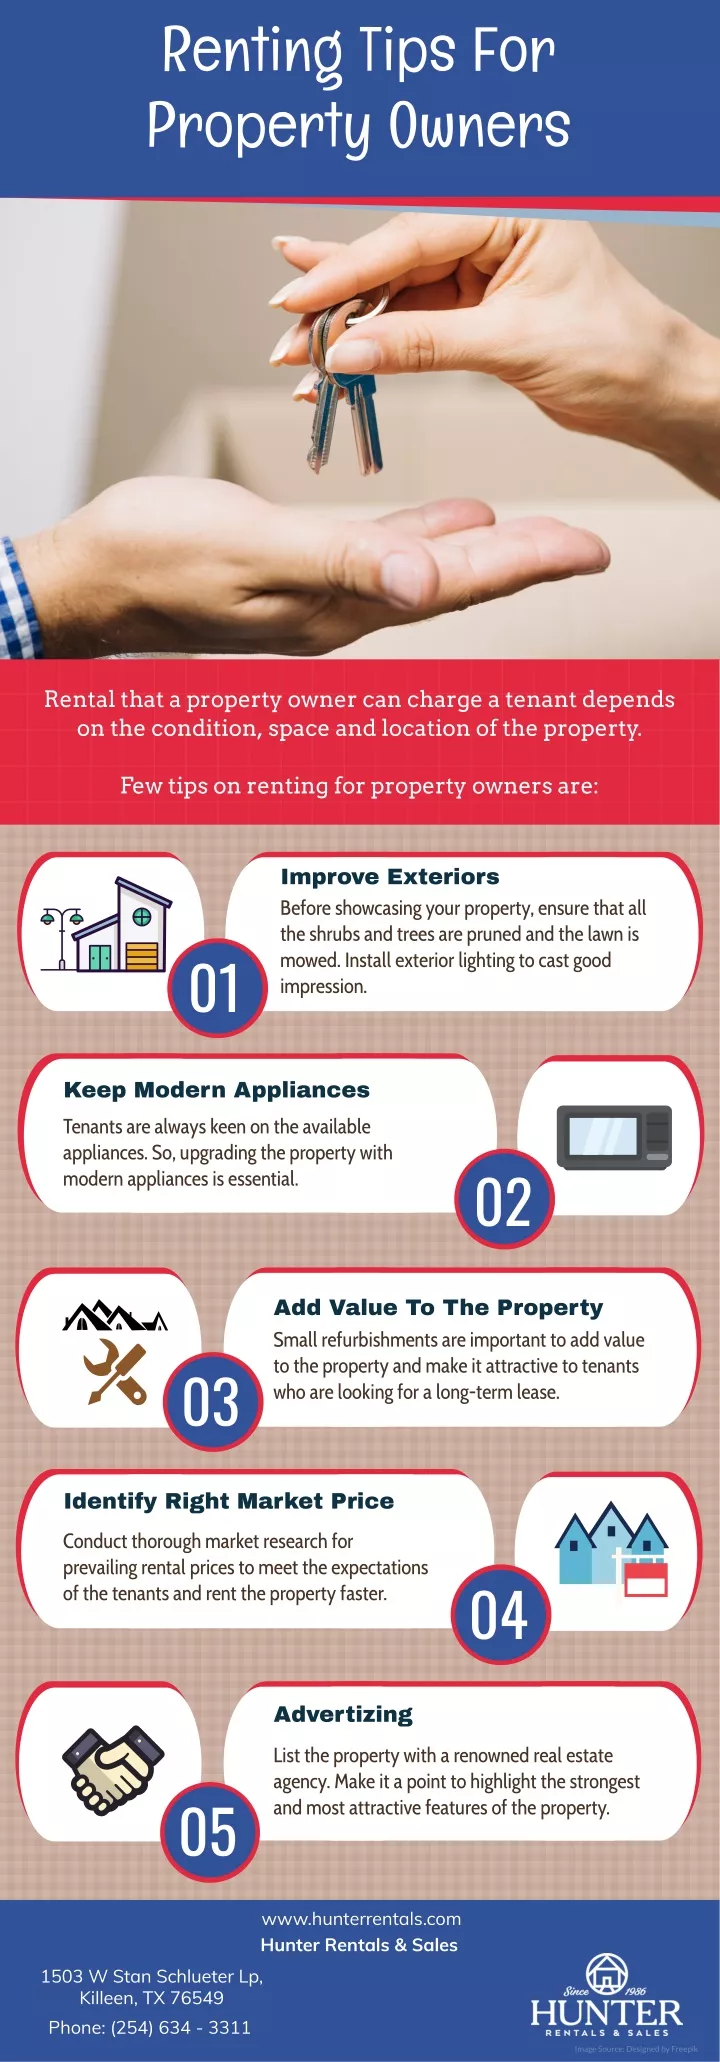 renting tips for